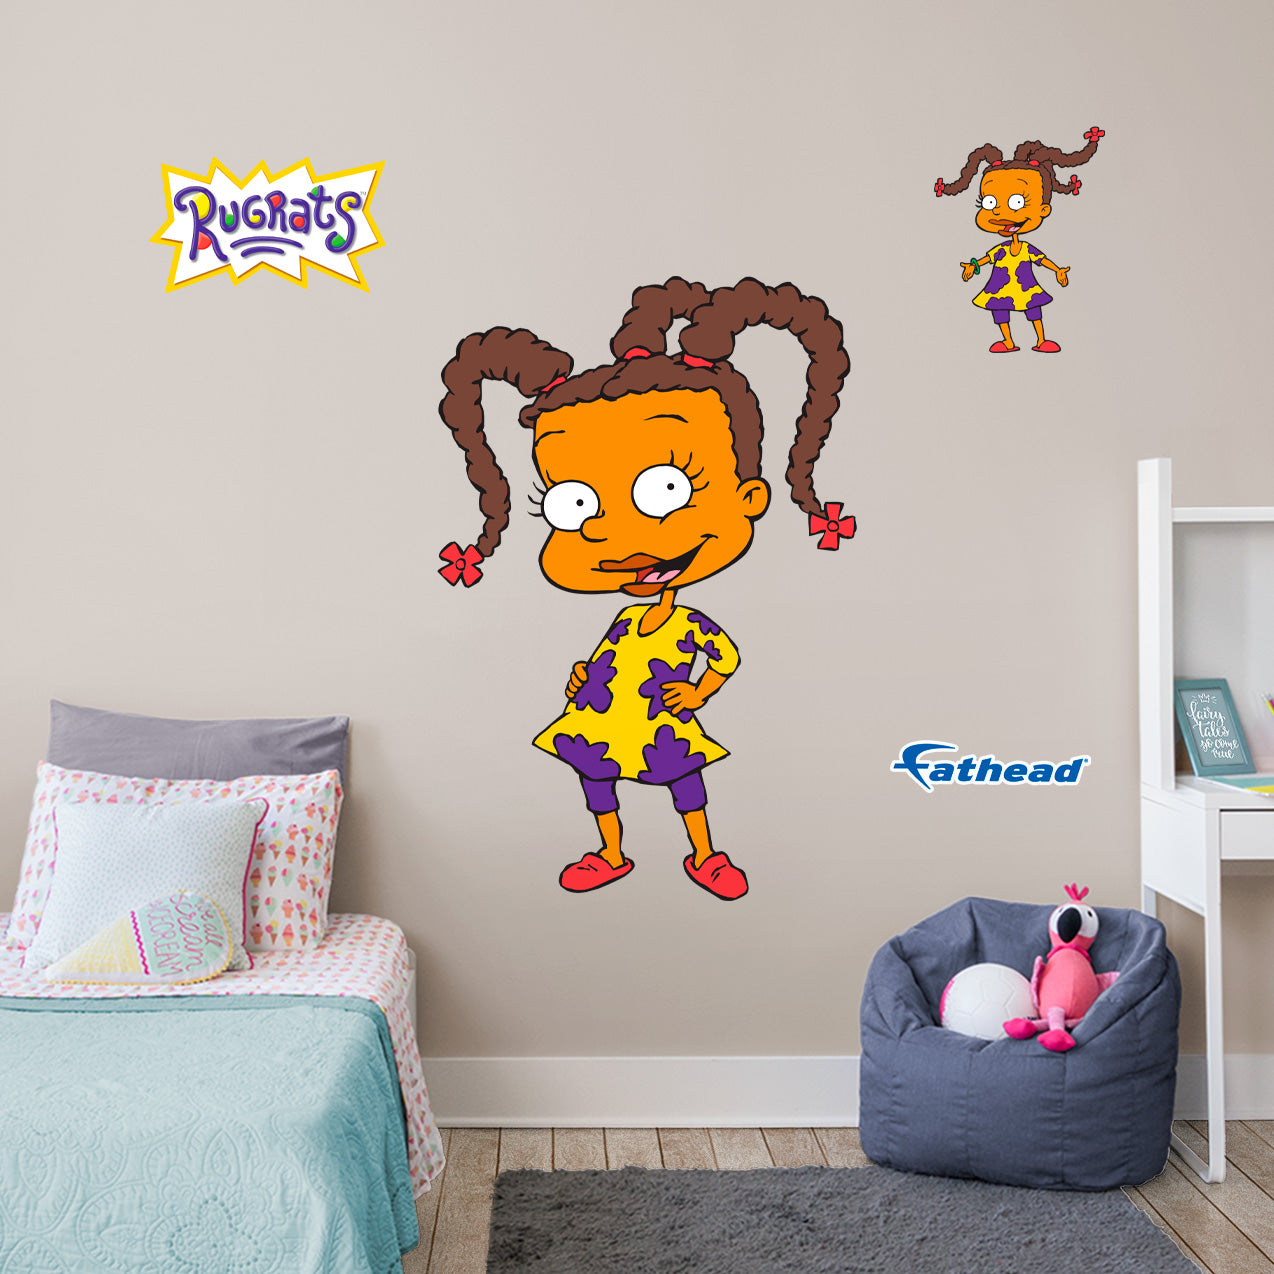 Giant Character +3 Decals  (35"W x 52"H) 